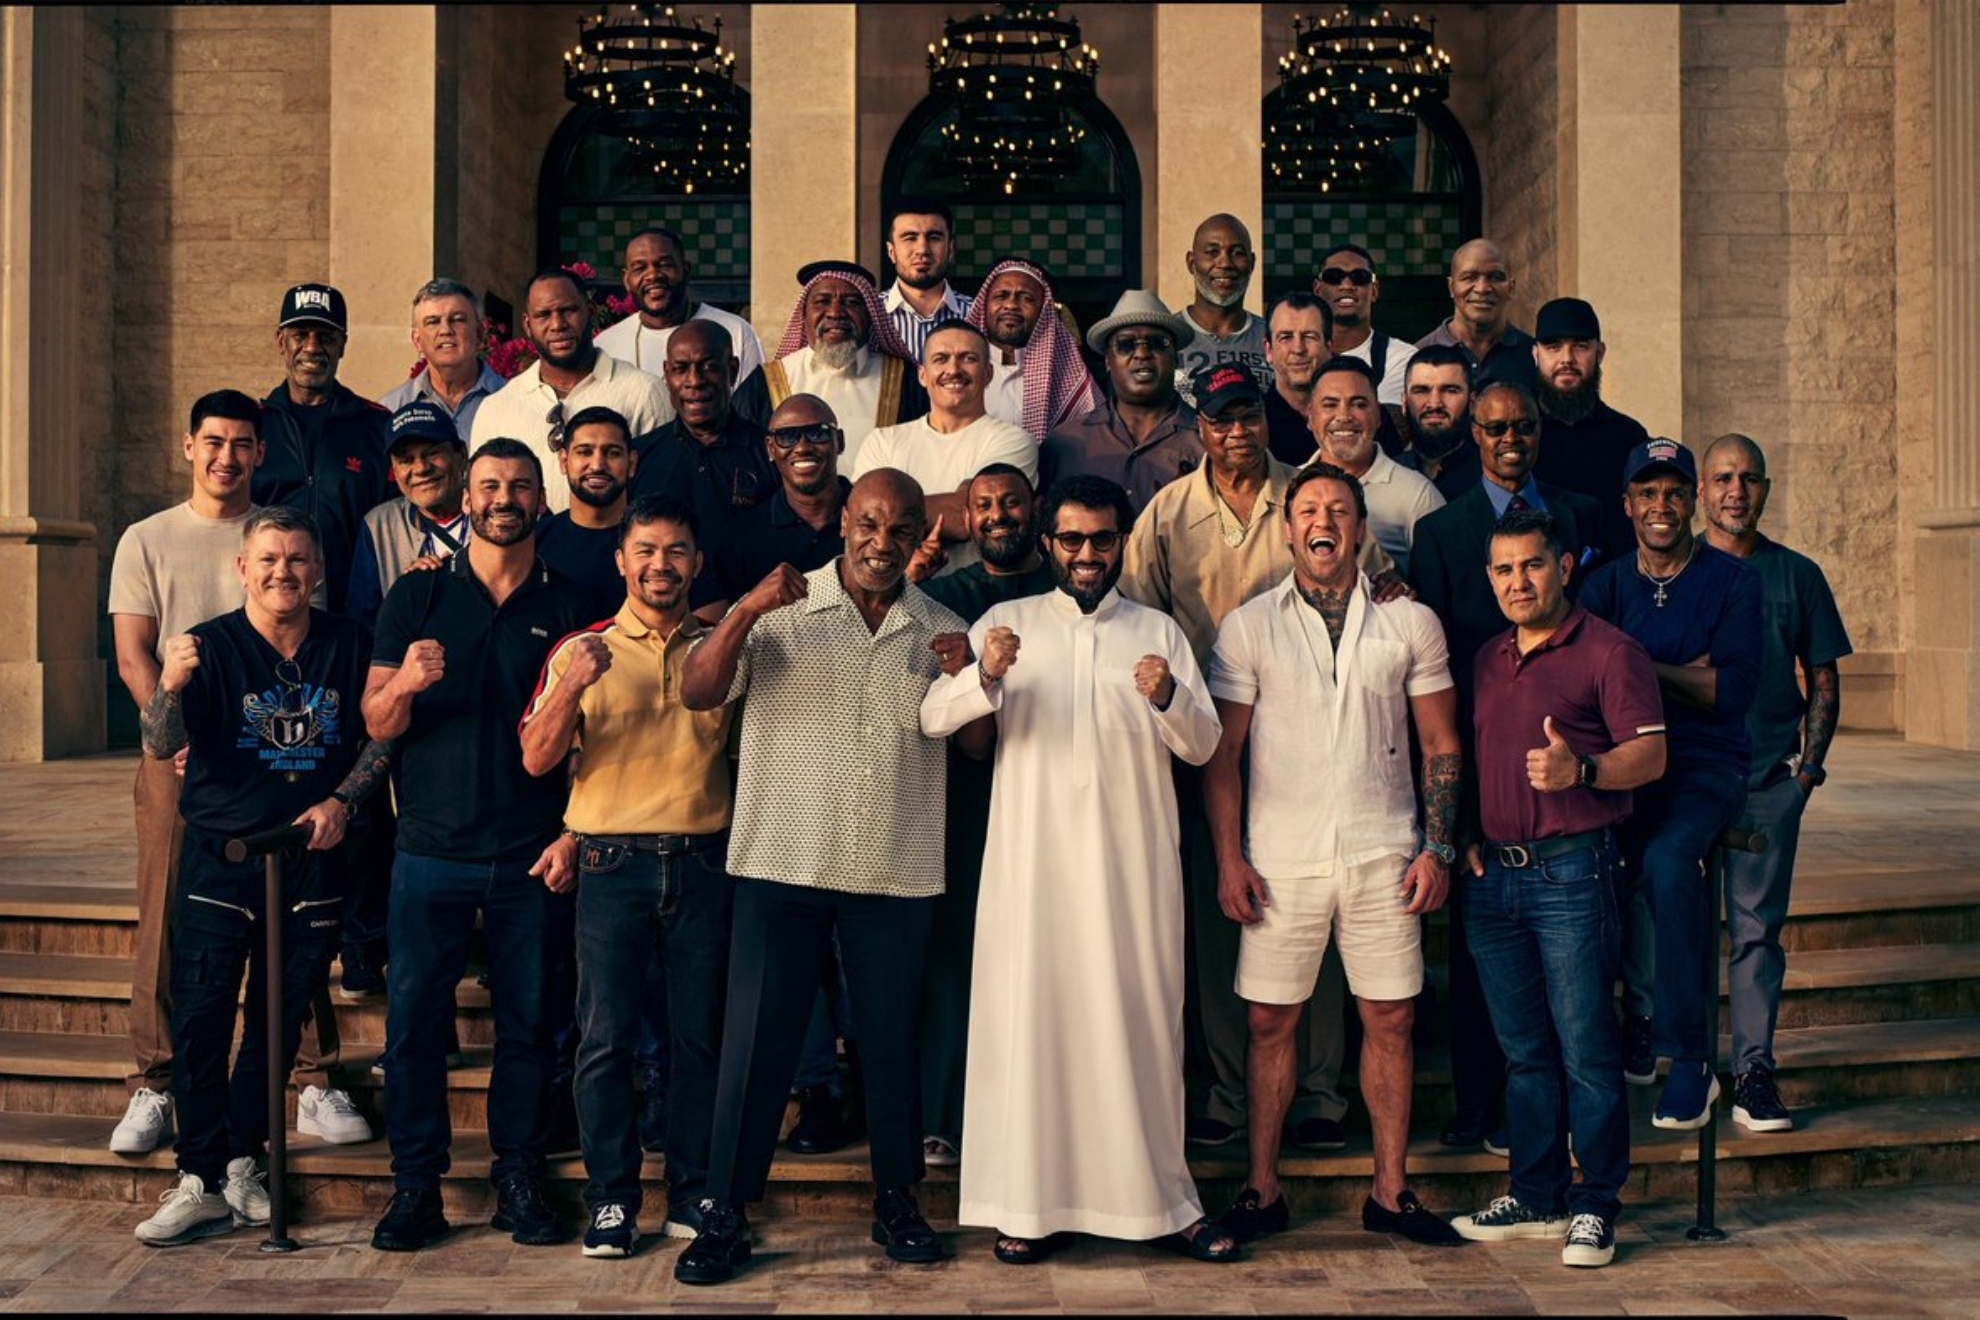 Boxing legends pose for a picture in Riyadh